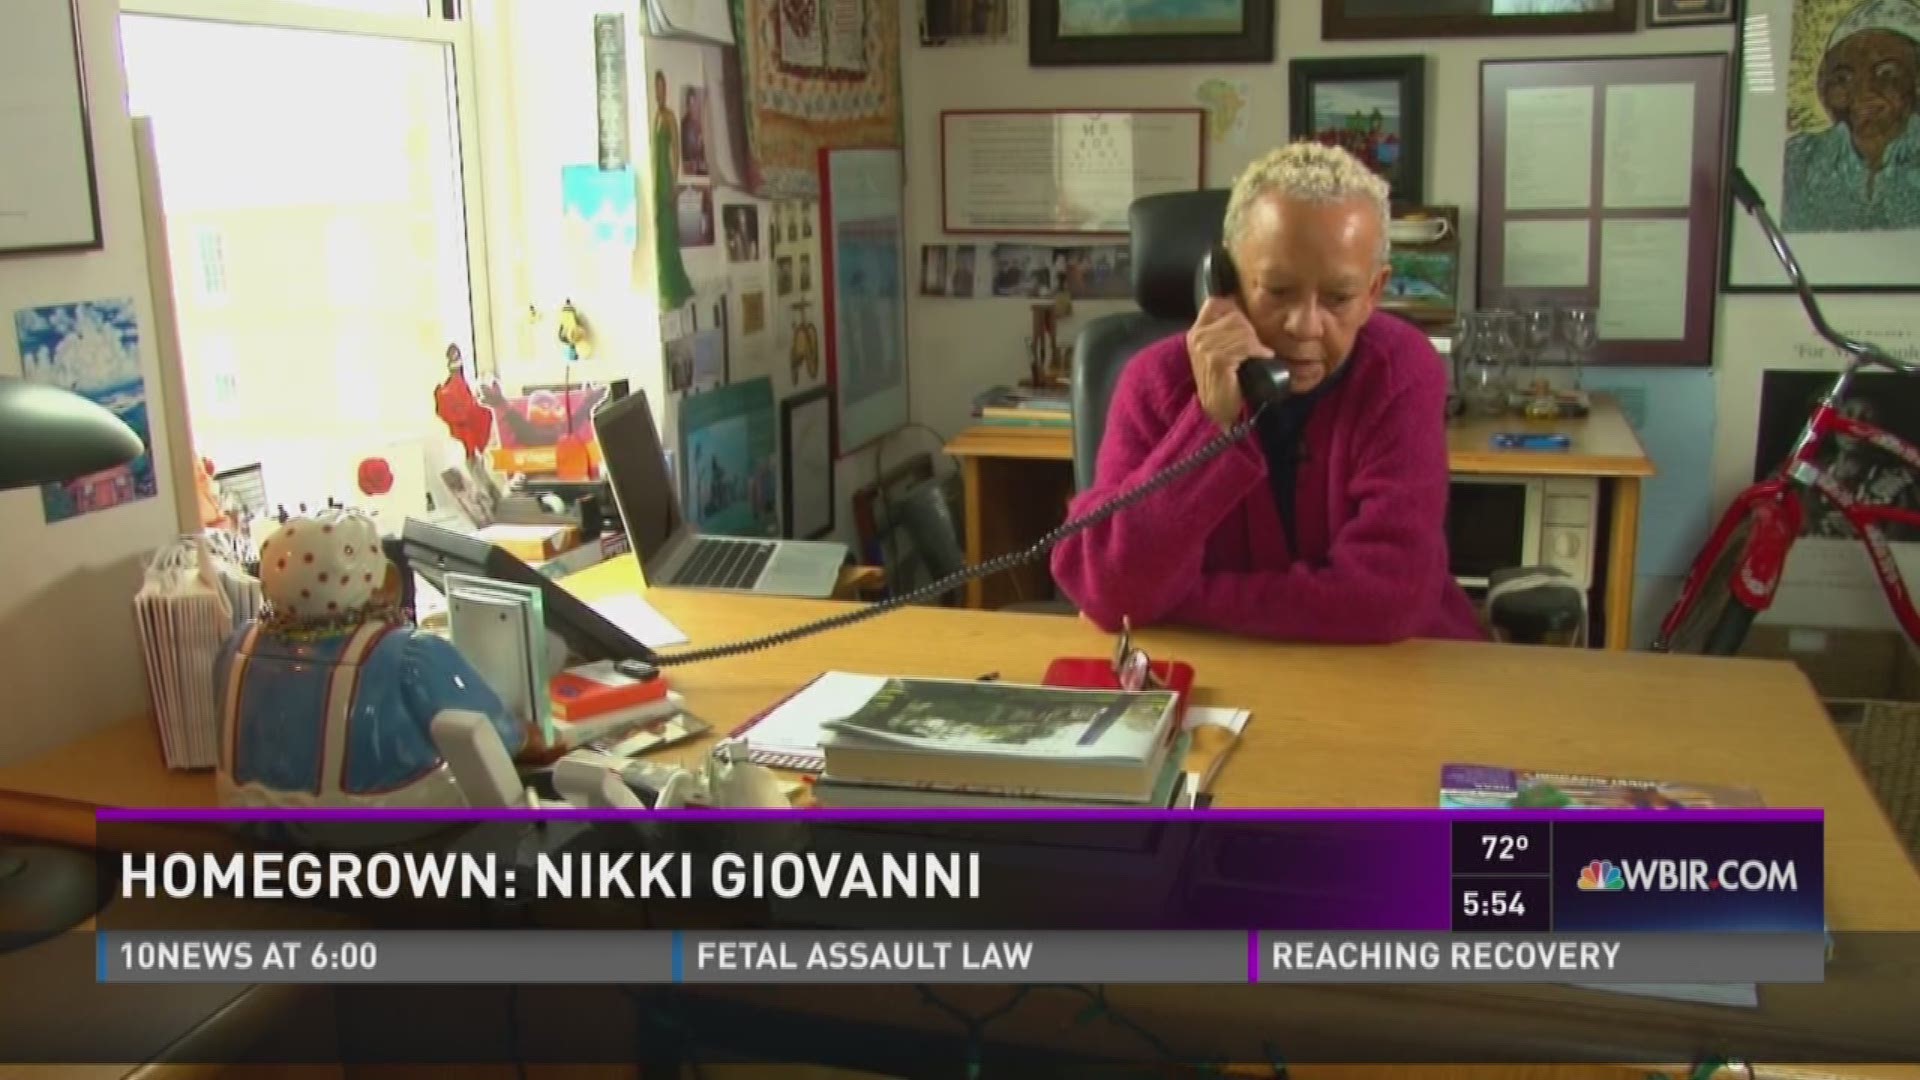 The world may know Nikki Giovanni as a writer and renowned poet. She's also a self-described space freak who loves to cook, read non-fiction and garden. 10News anchor Beth Haynes has Nikki Giovanni's HomeGrown story.